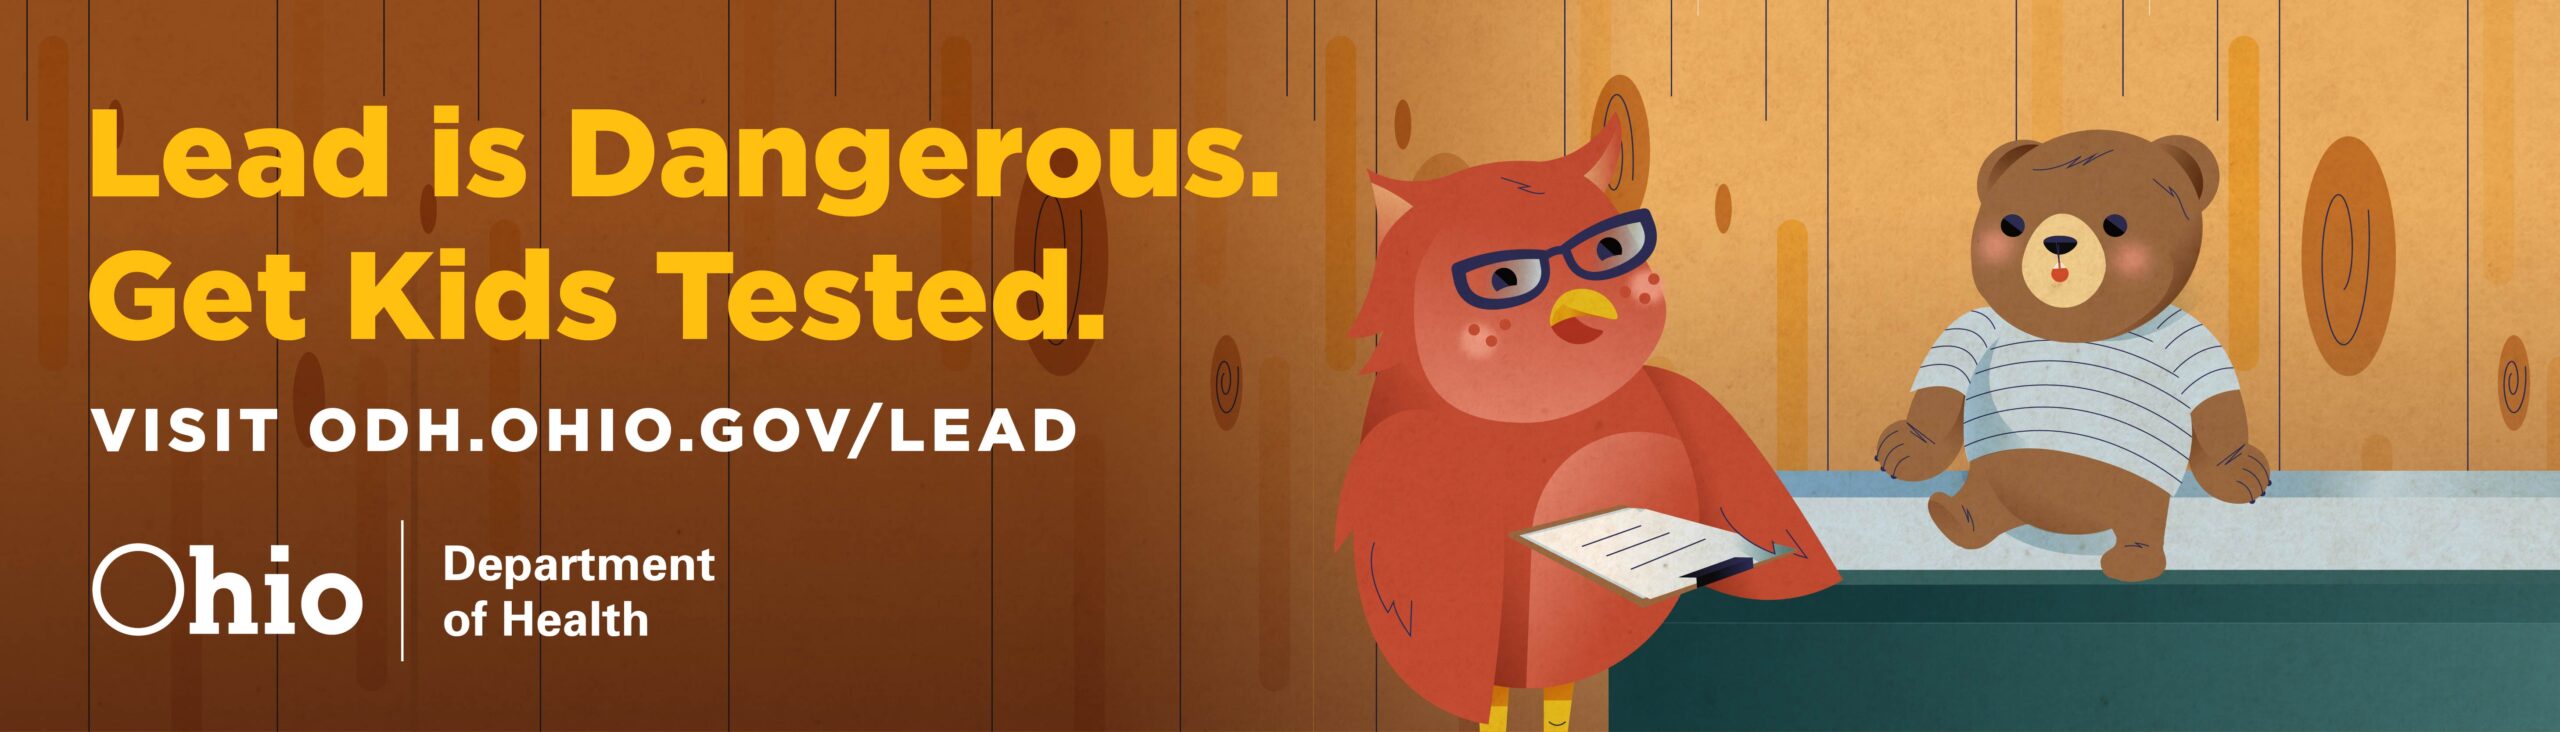 Lead is Dangerous. Get kids tested banner